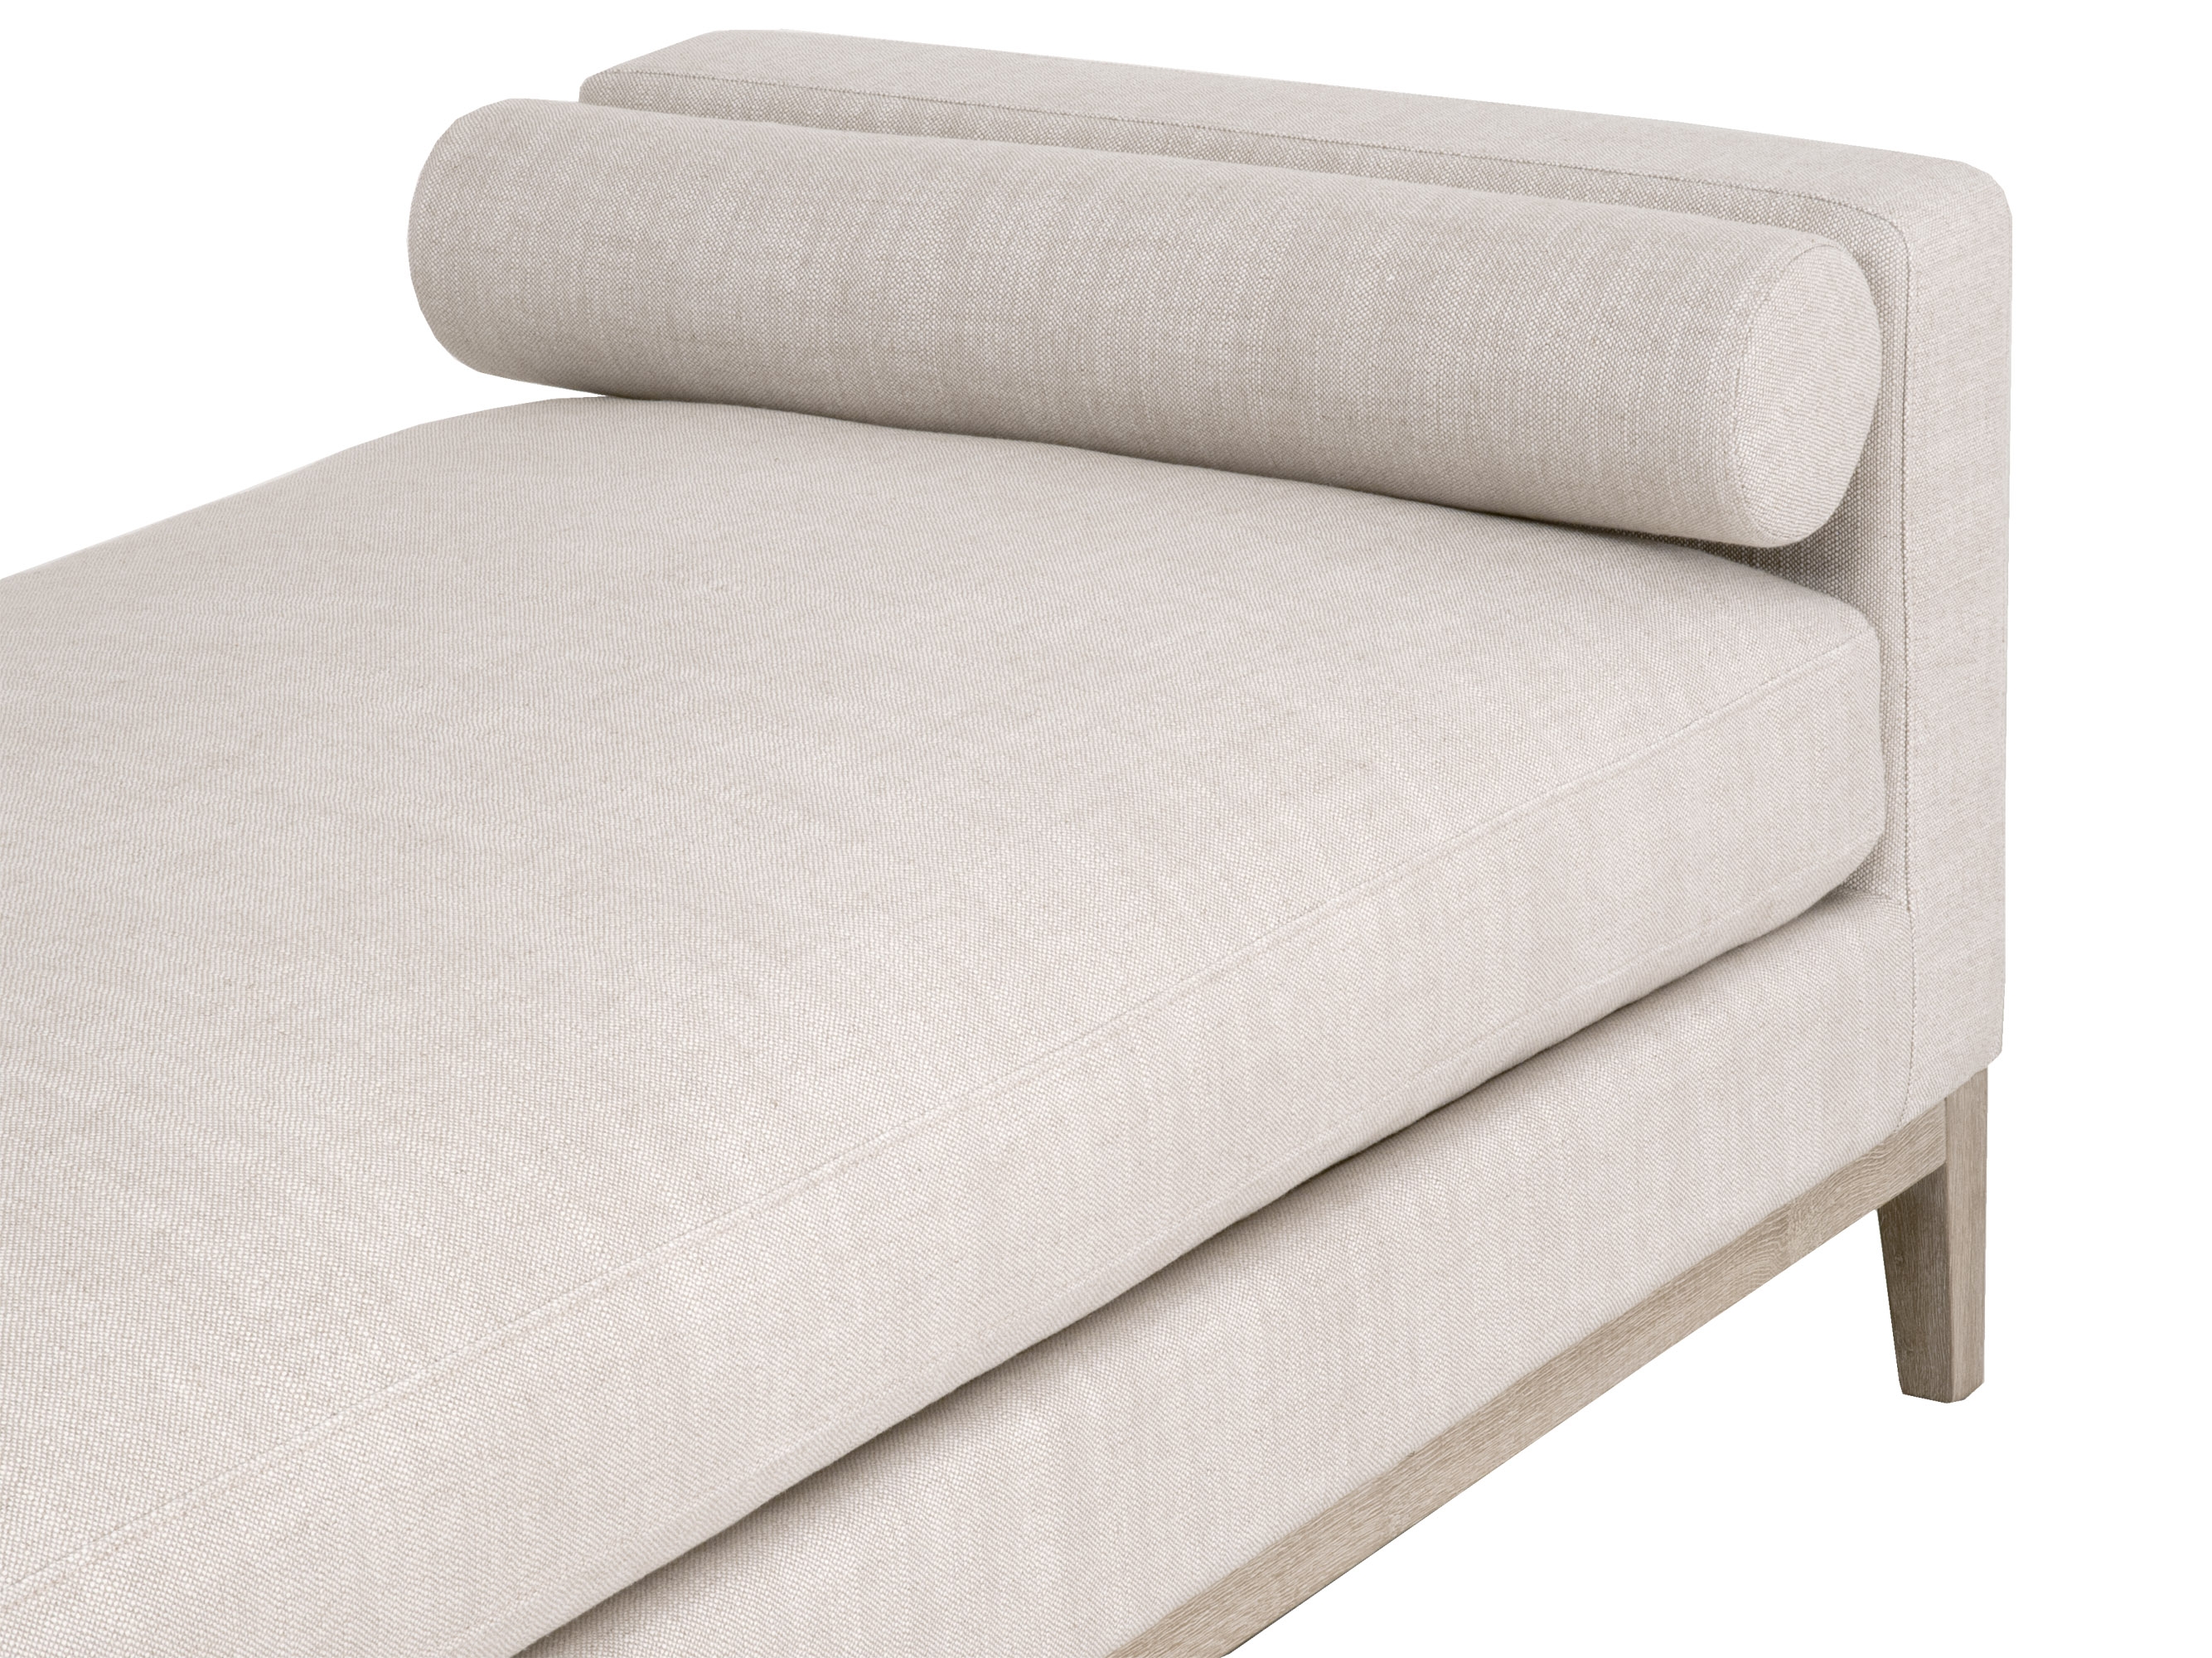 77.5"W x 33"D Keaton Daybed - Image 3